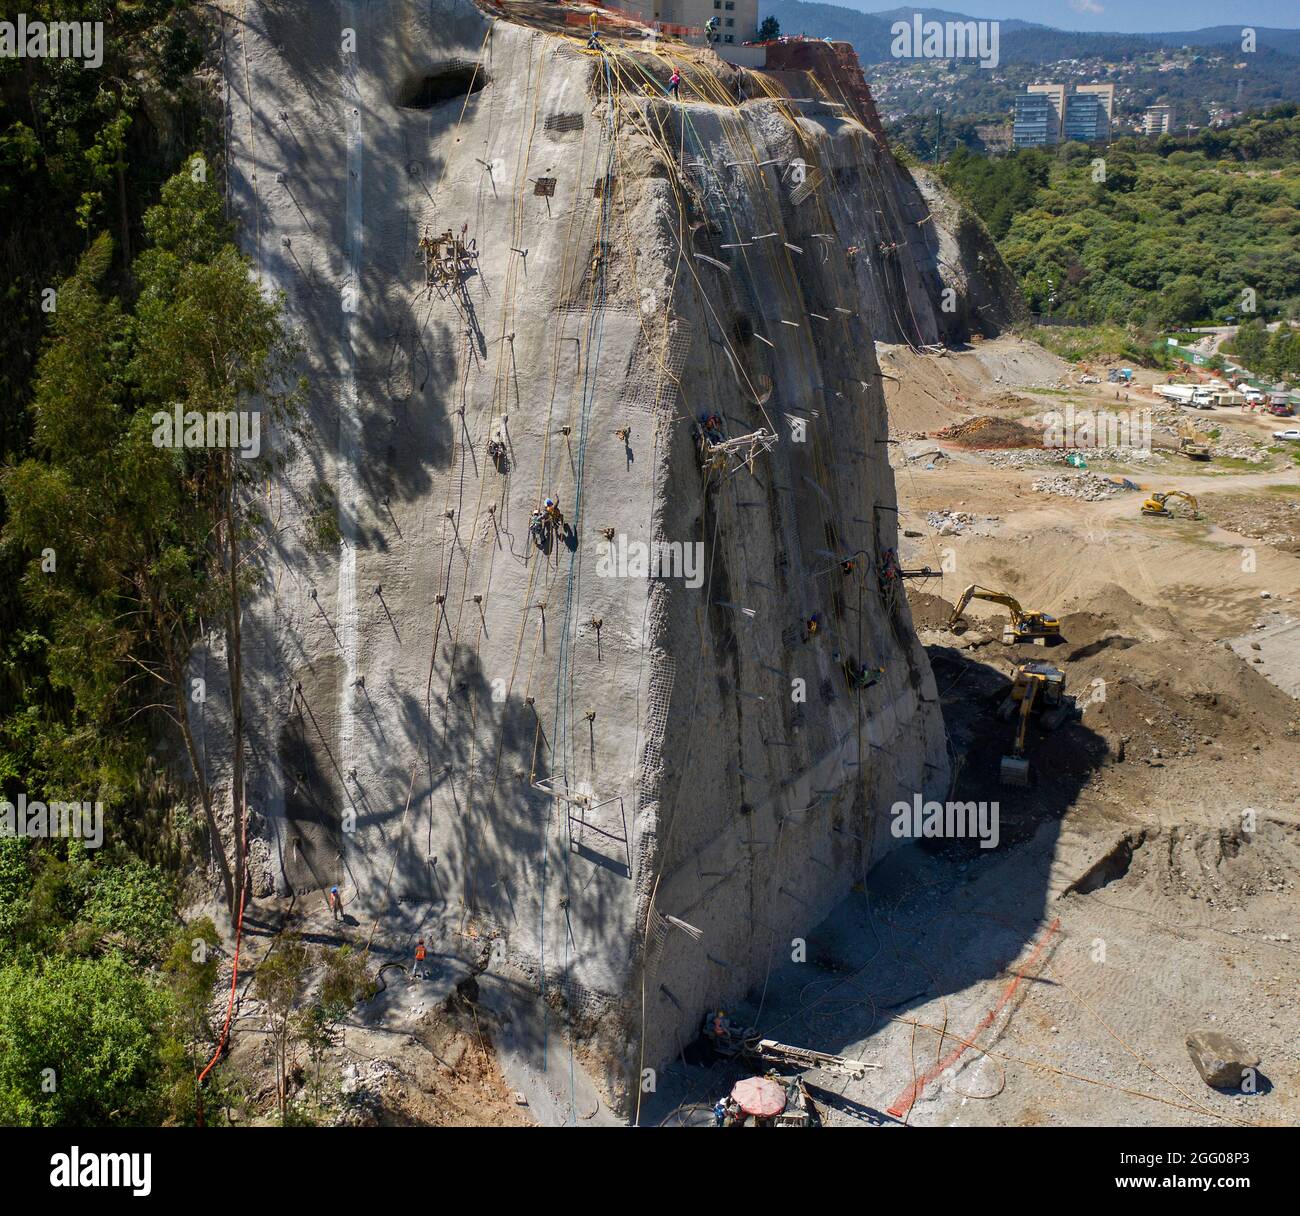 Workers reinforce a cliff face in the Santa Fe area of Mexico City, Mexico Stock Photo